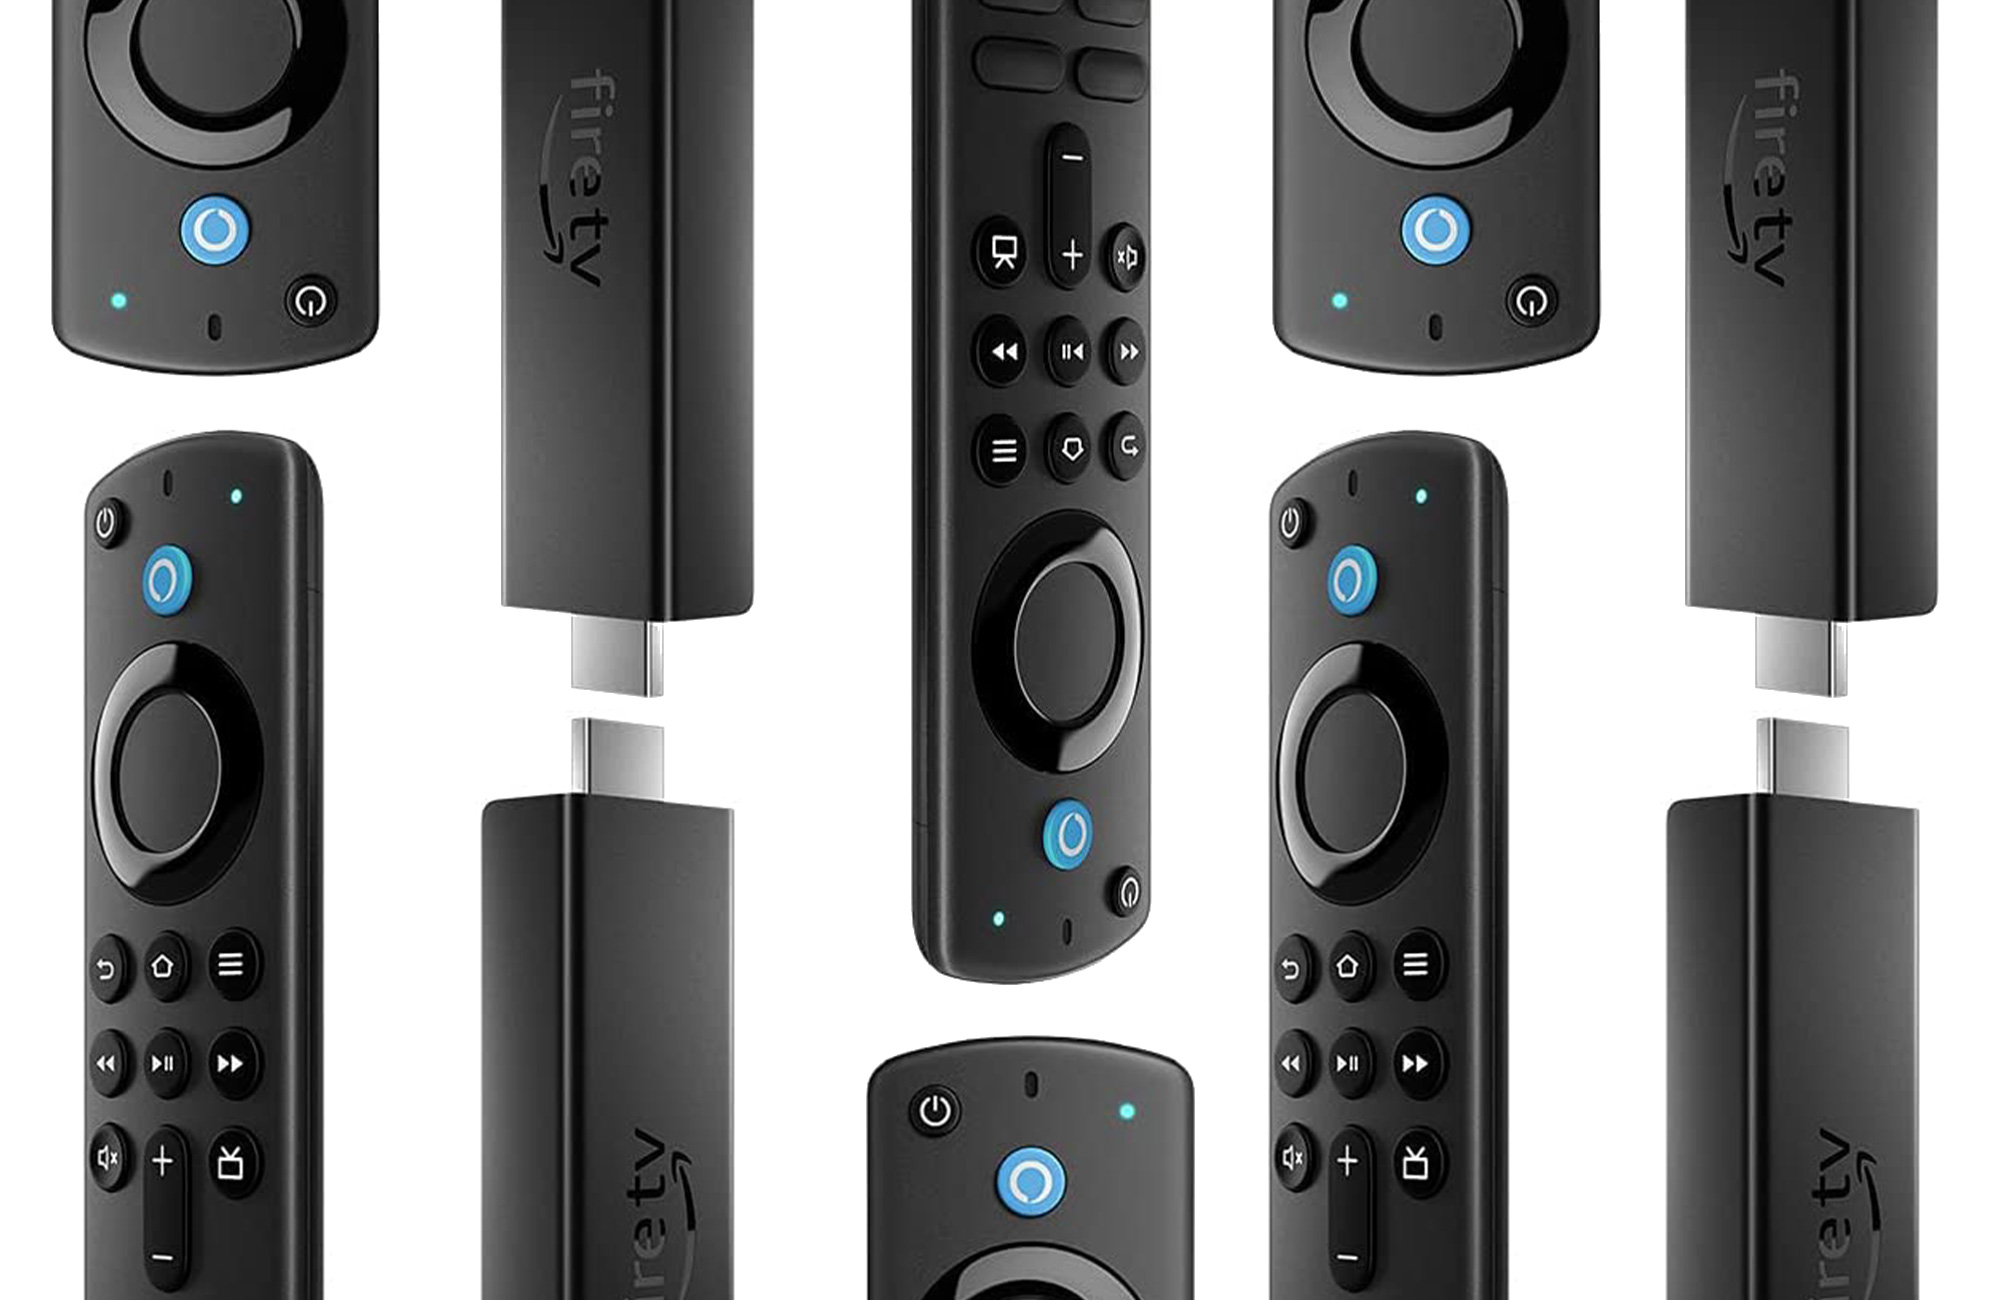 Get a $20  Fire TV Stick for your travels